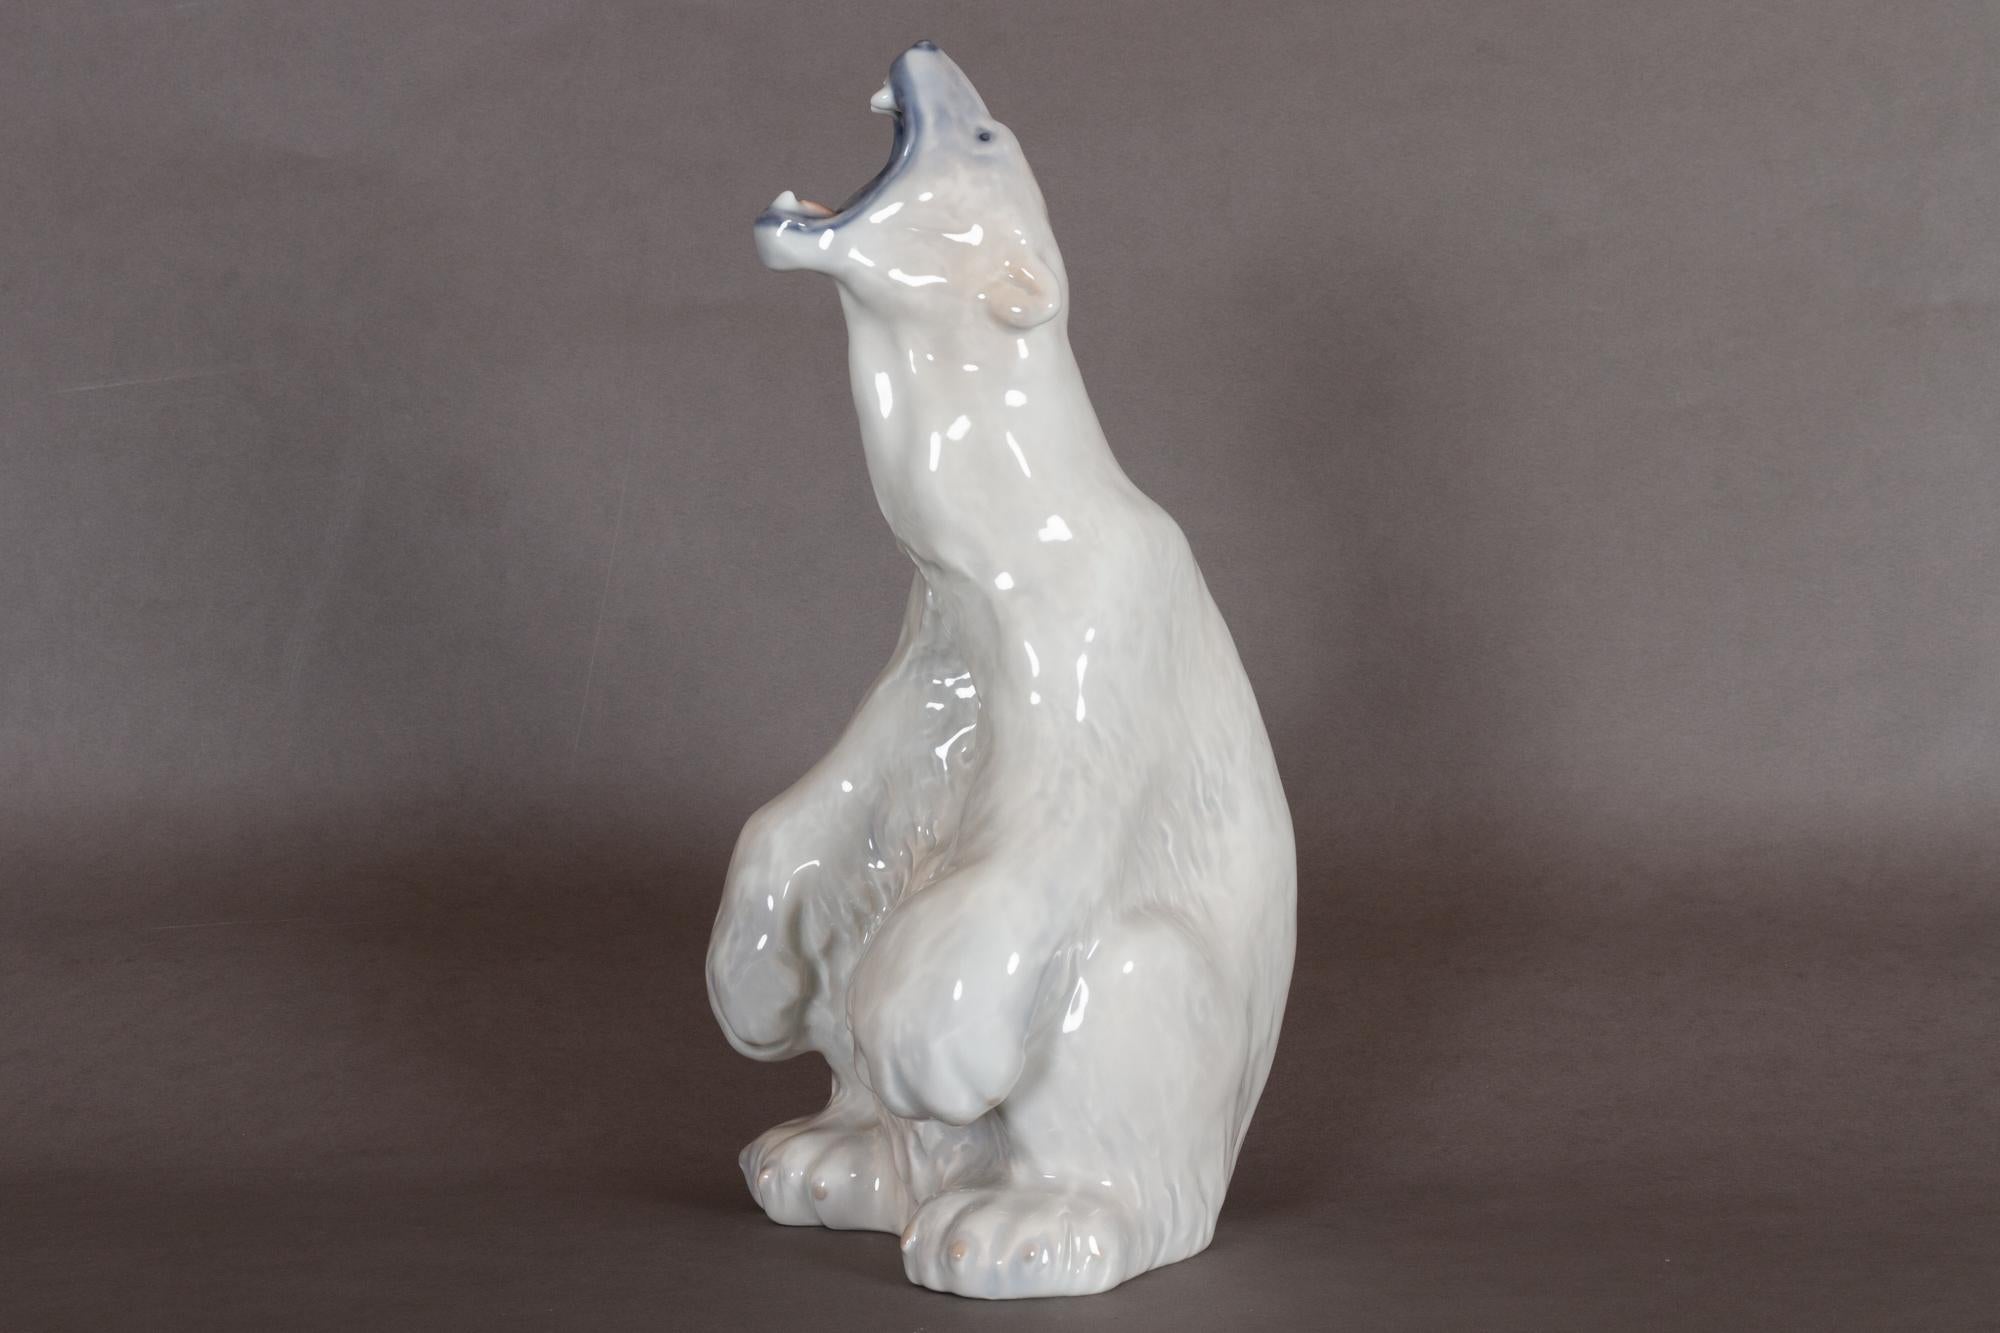 Danish porcelain polar bear sculpture by C. F. Liisberg for Royal Copenhagen, 1970s.
Large polar bear figurine in porcelain by Carl Frederik Liisberg for Danish manufacturer Royal Copenhagen. Designed in 1901, this example was made between 1975 and